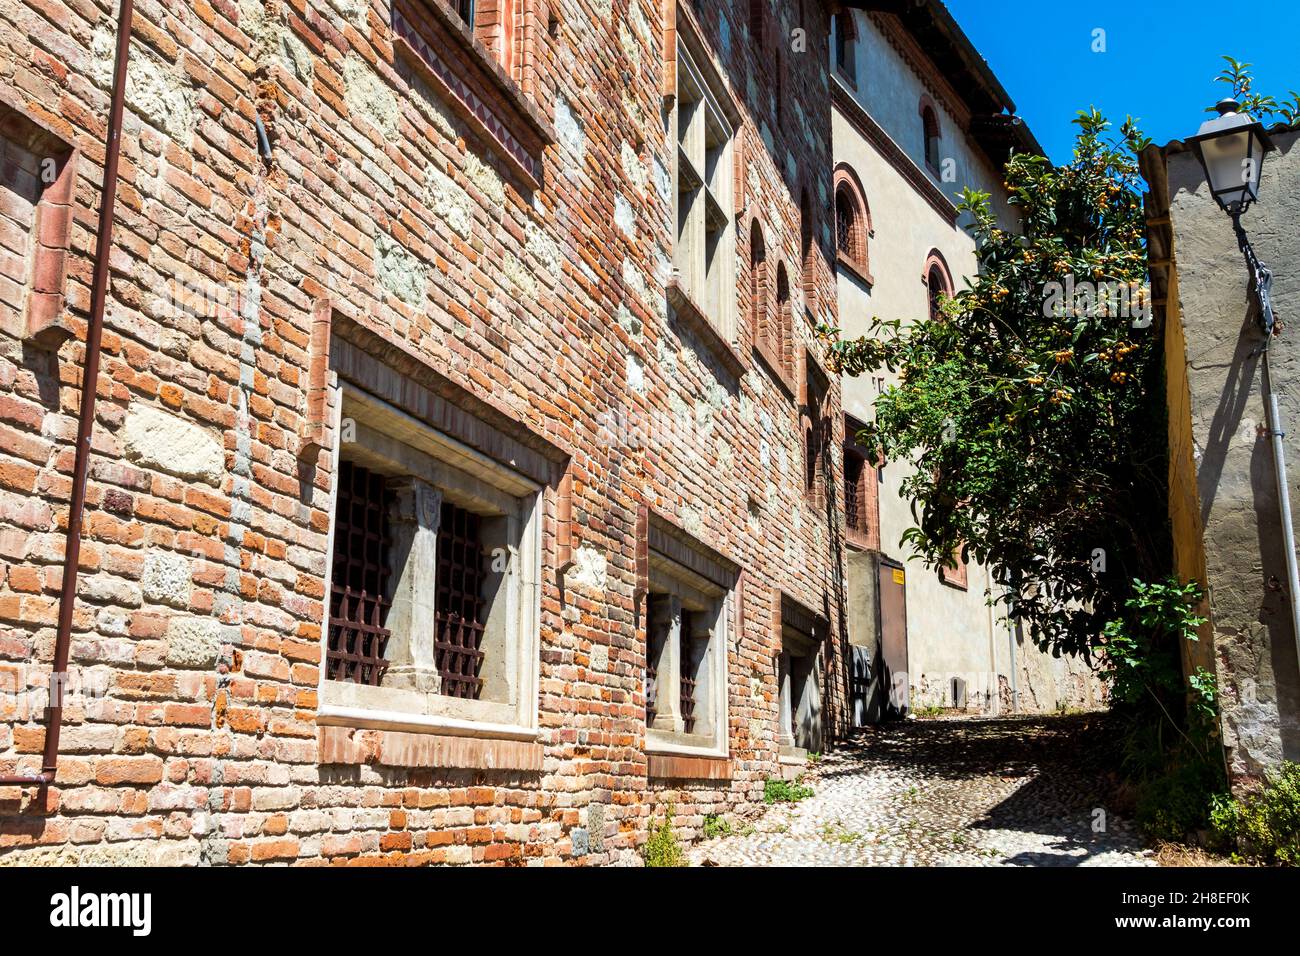 Gabiano Monferrato, Alessandria, Piedmont, Italy - June 10 2021: Detail of a typical street in a sunny day Stock Photo